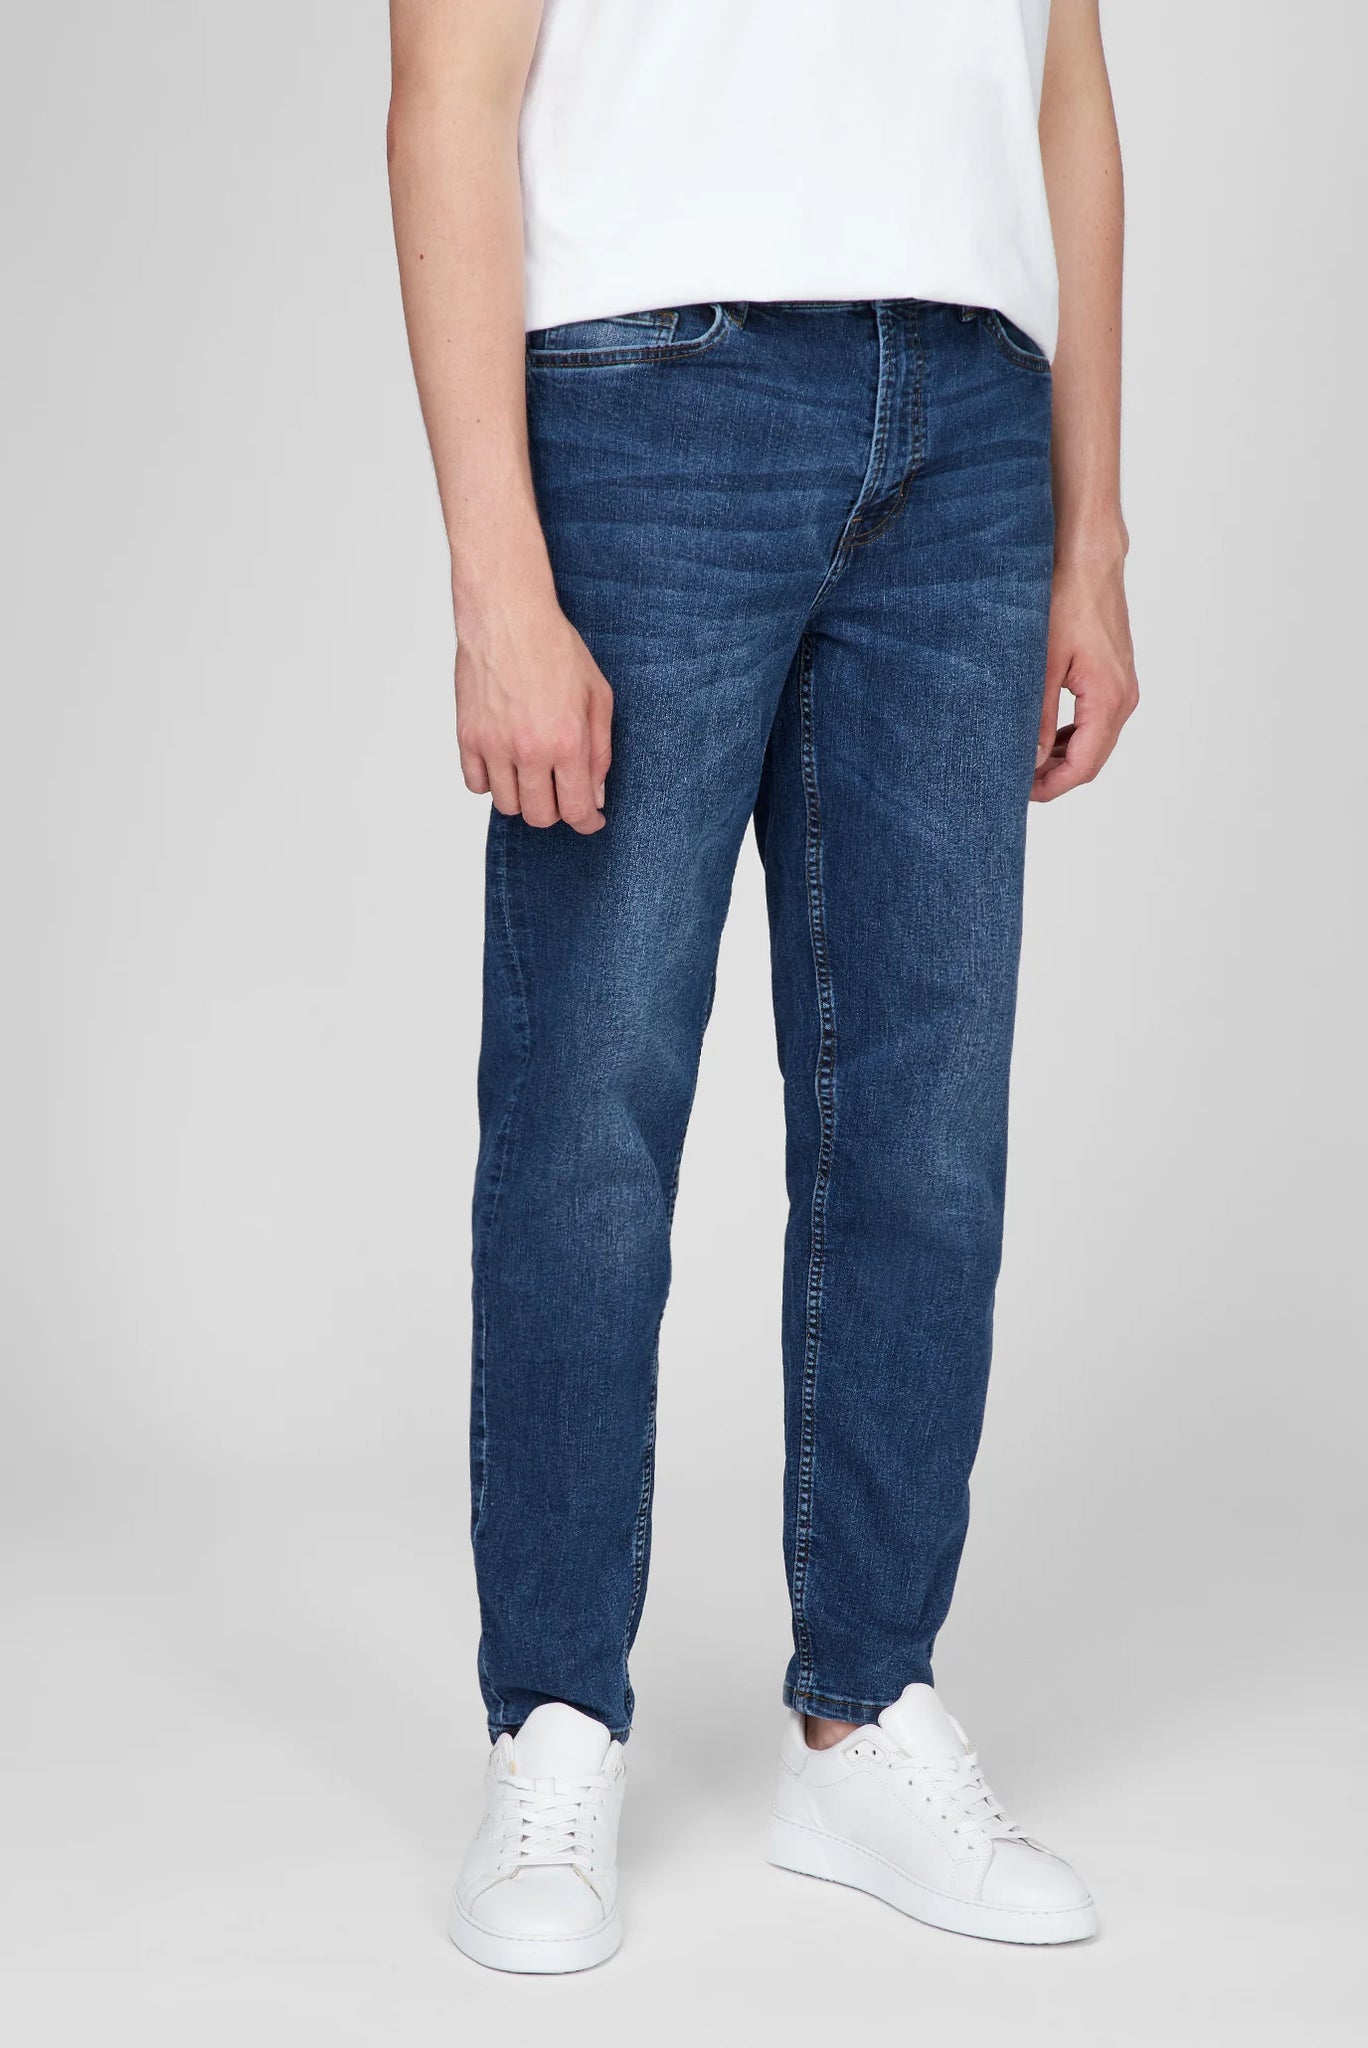 DPRECYCLED CARROT JEANS